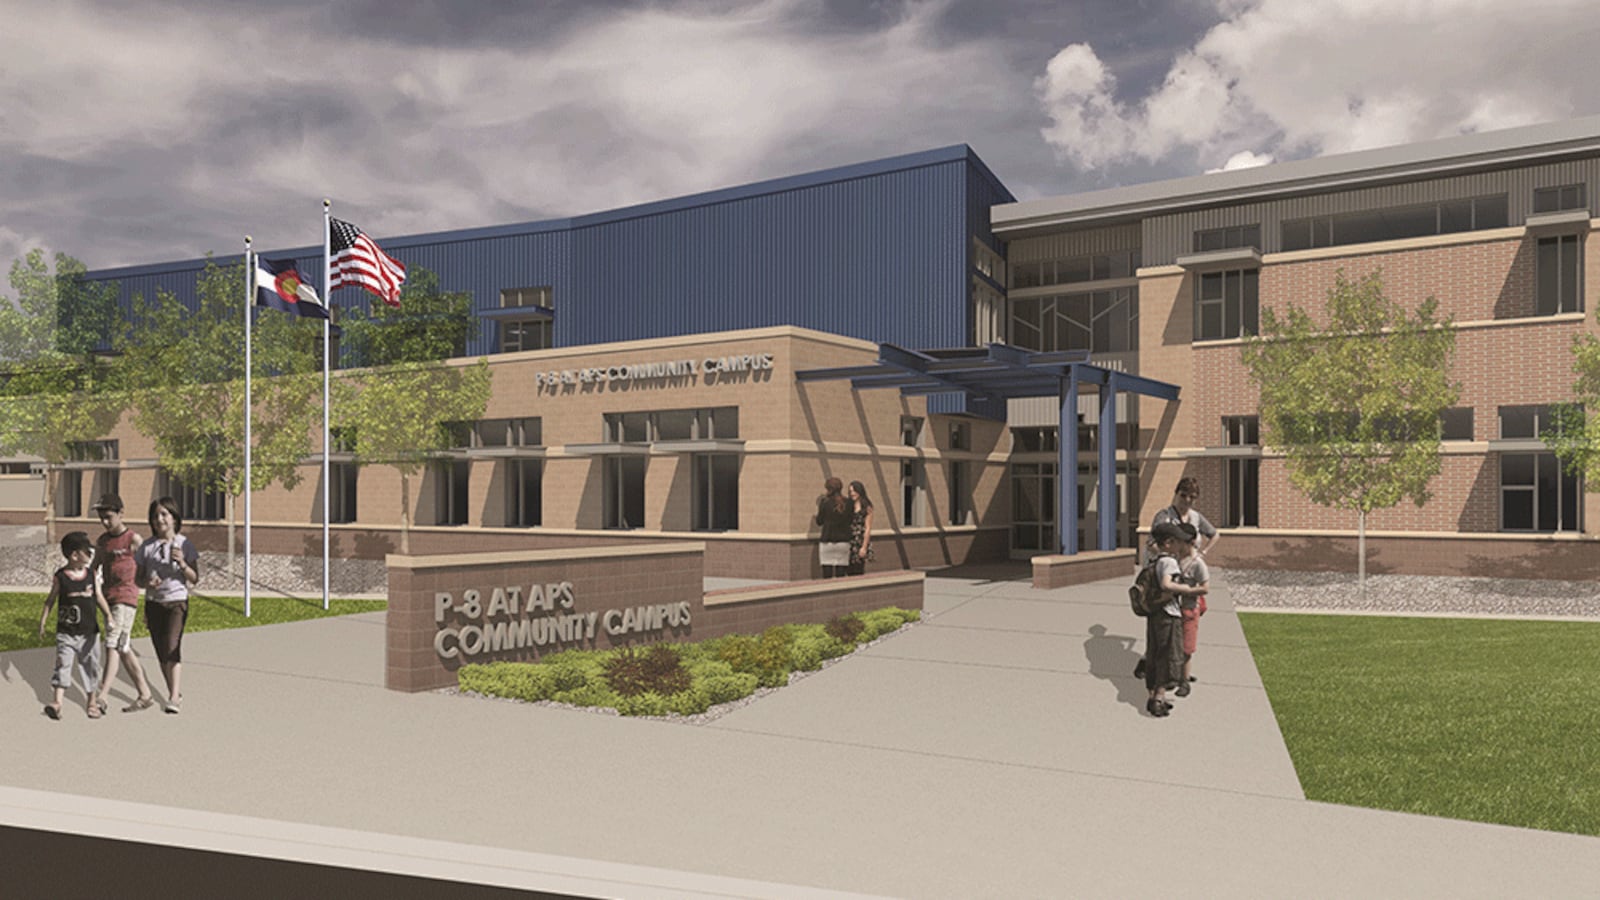 An artist's rendering of the front of Aurora Public School's new school that is expected to open next year. The school will serve preschool through eighth graders at 6th Avenue and Airport.